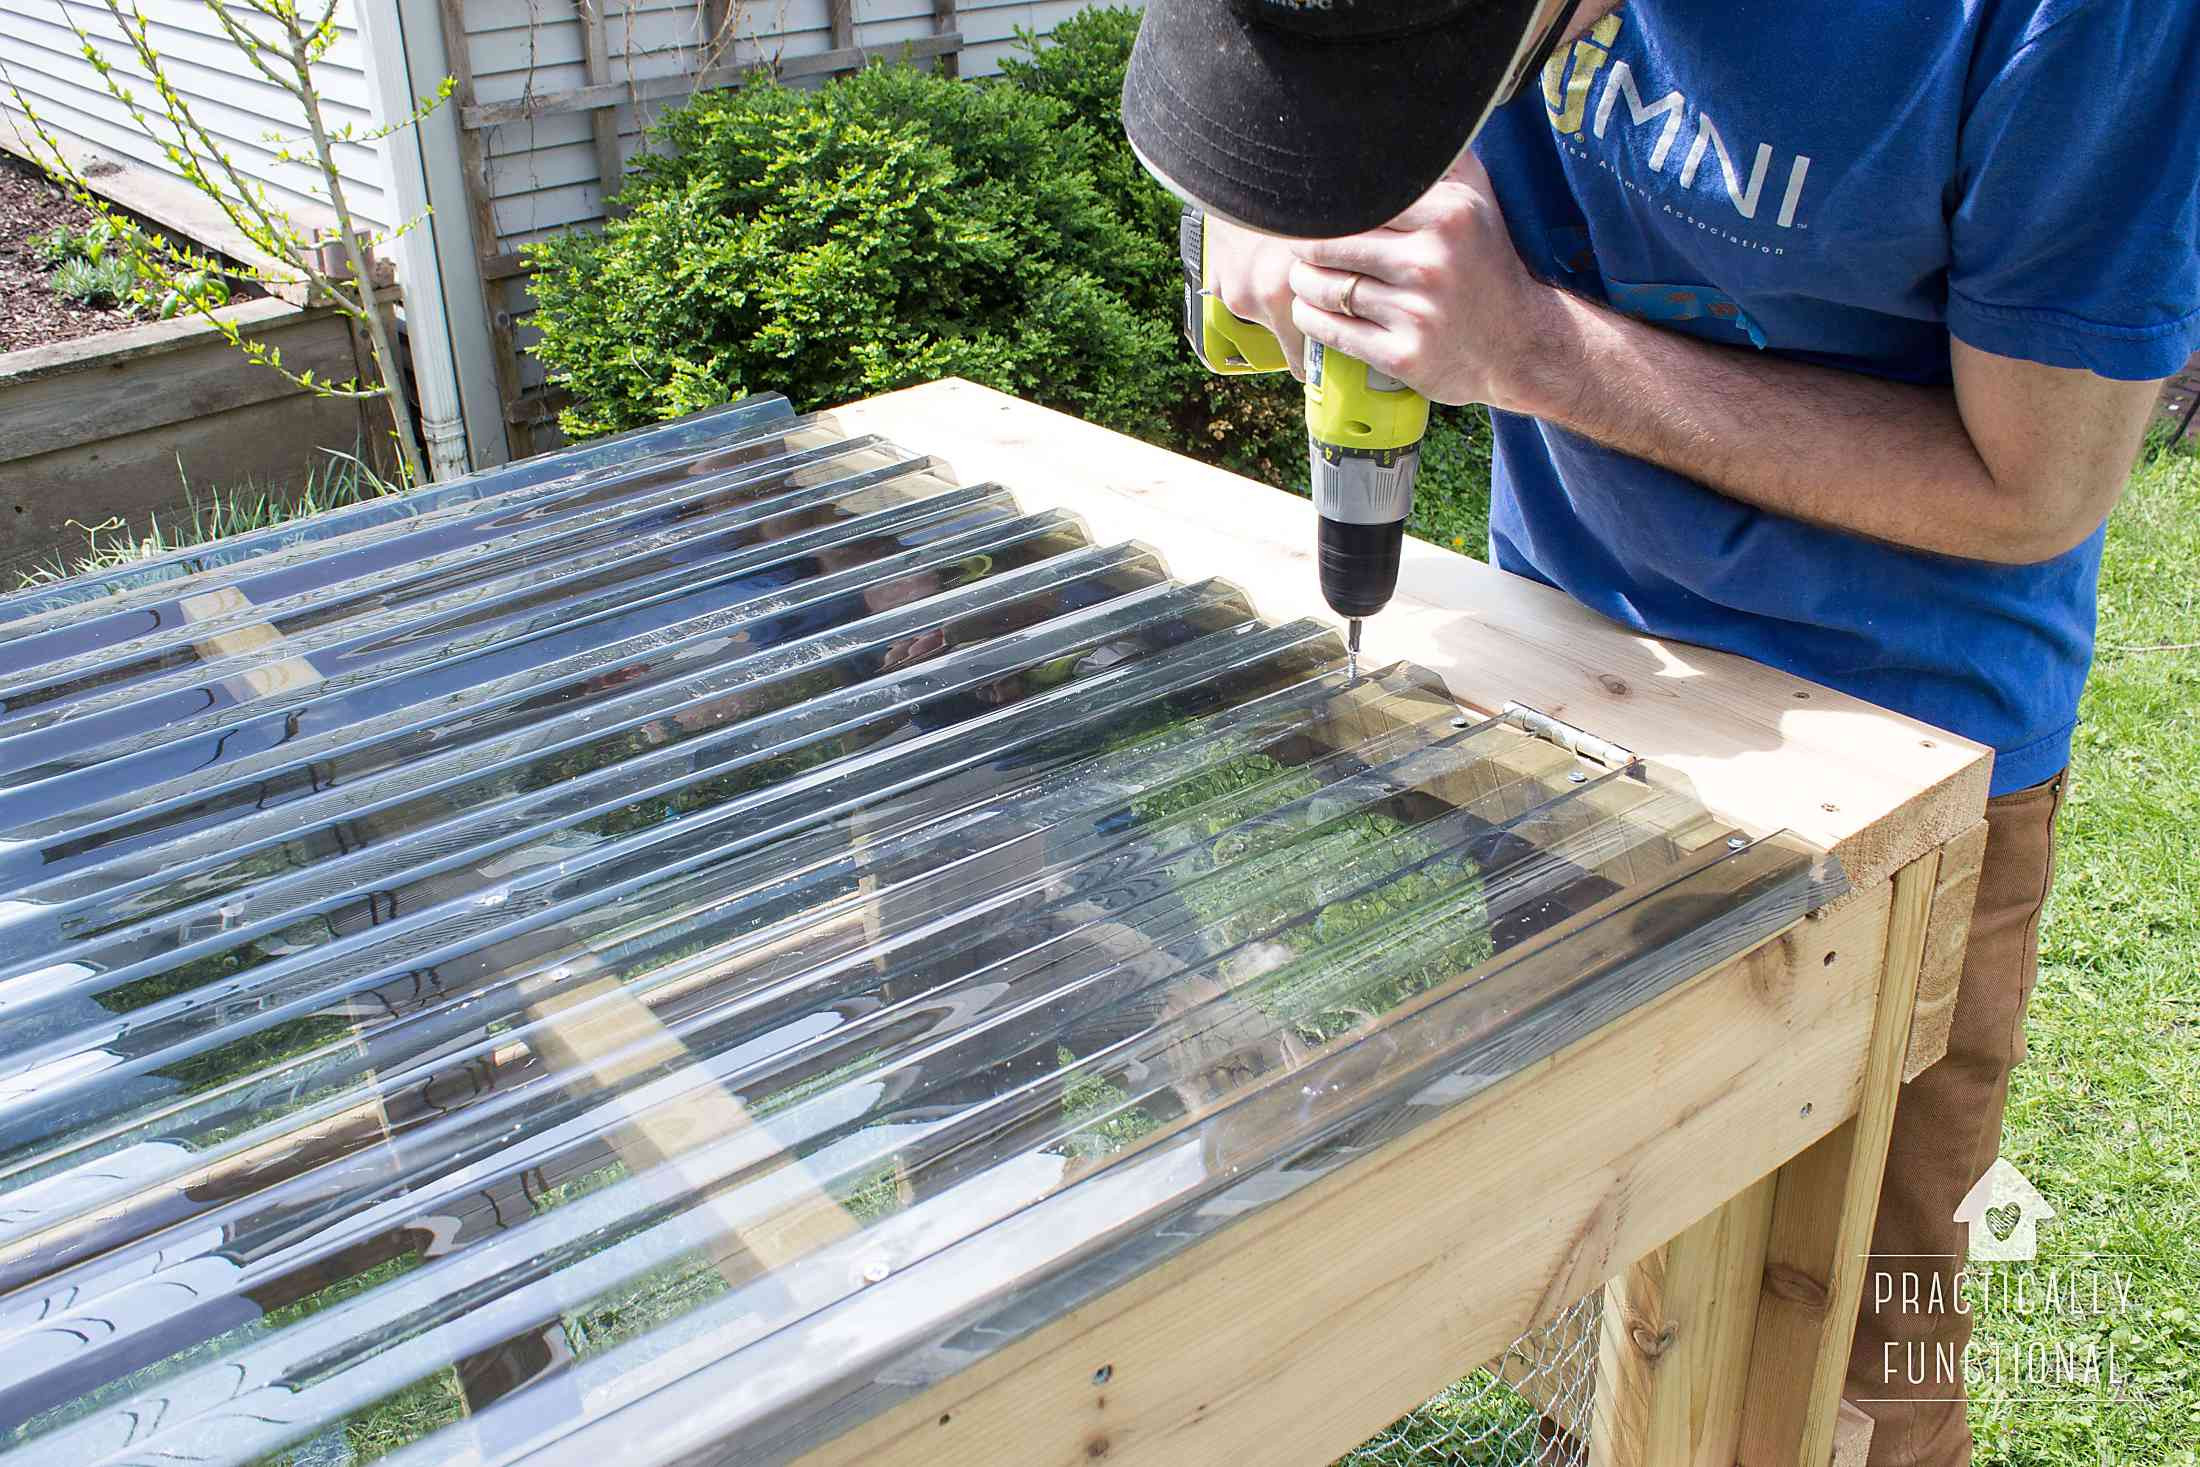 DIY Compost Bins Plans
 How To Build A Screened In Porch